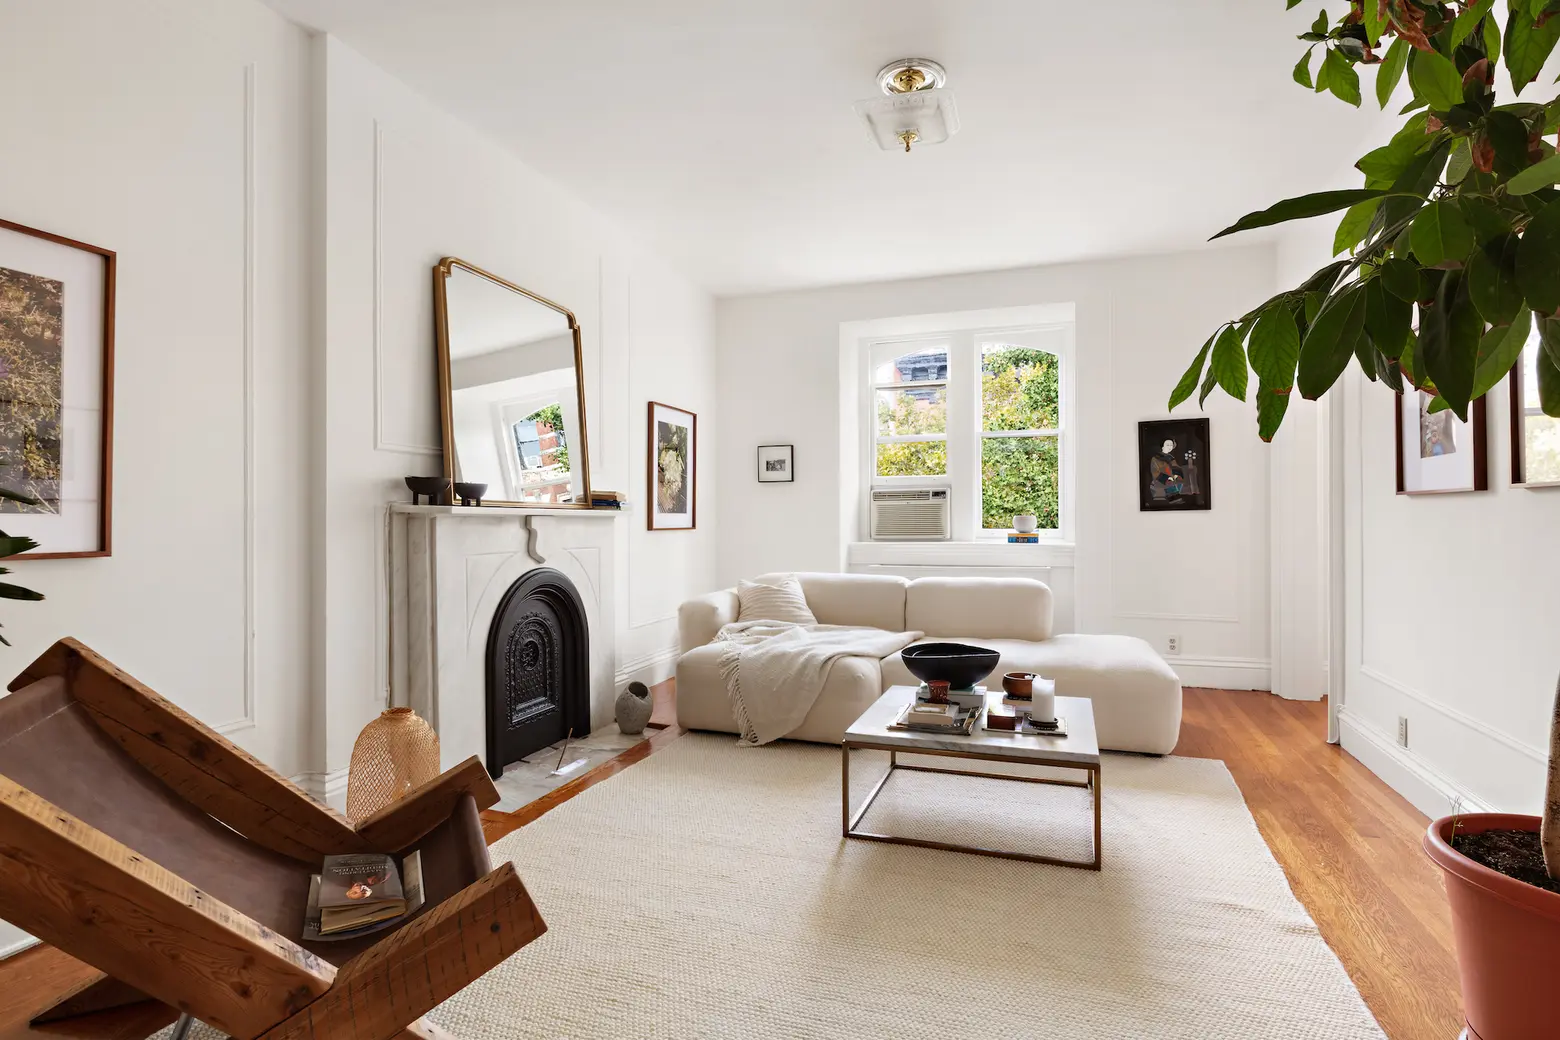 $9.4M four-family townhouse is an unspoiled West Village dream with a celebrity past